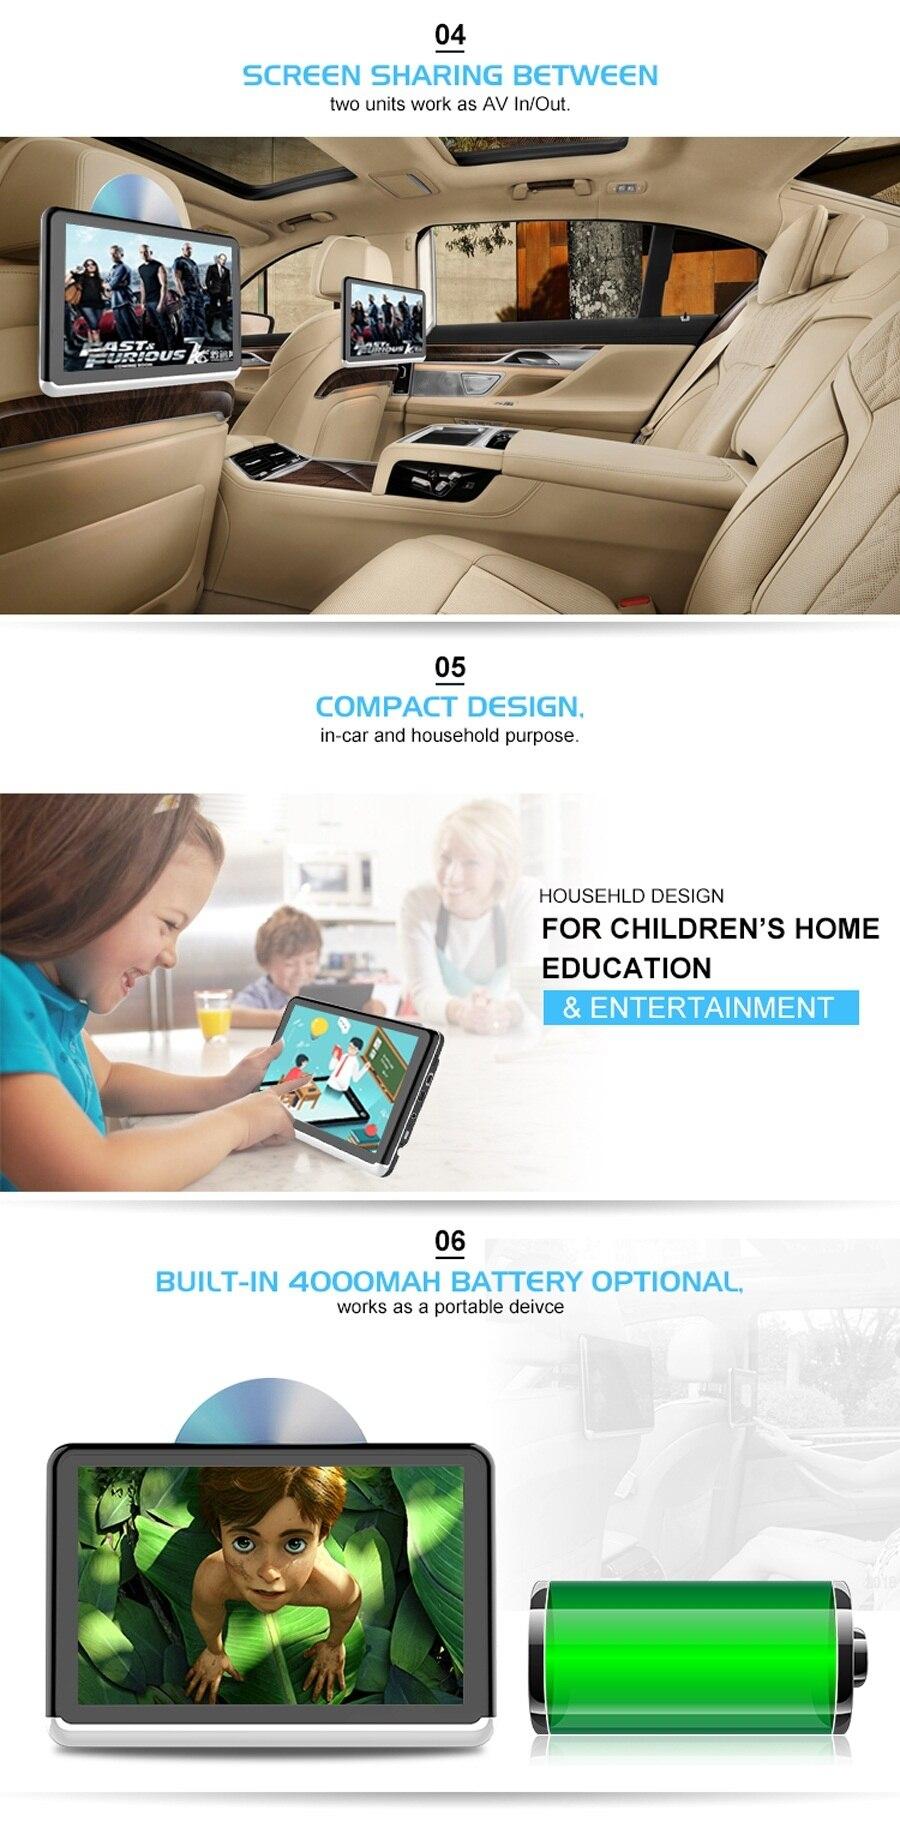 OTOJETA Android 6.0 car DVD quad core 16gb ROM car multimedia music video player headrest Monitor portable for home and vehicle